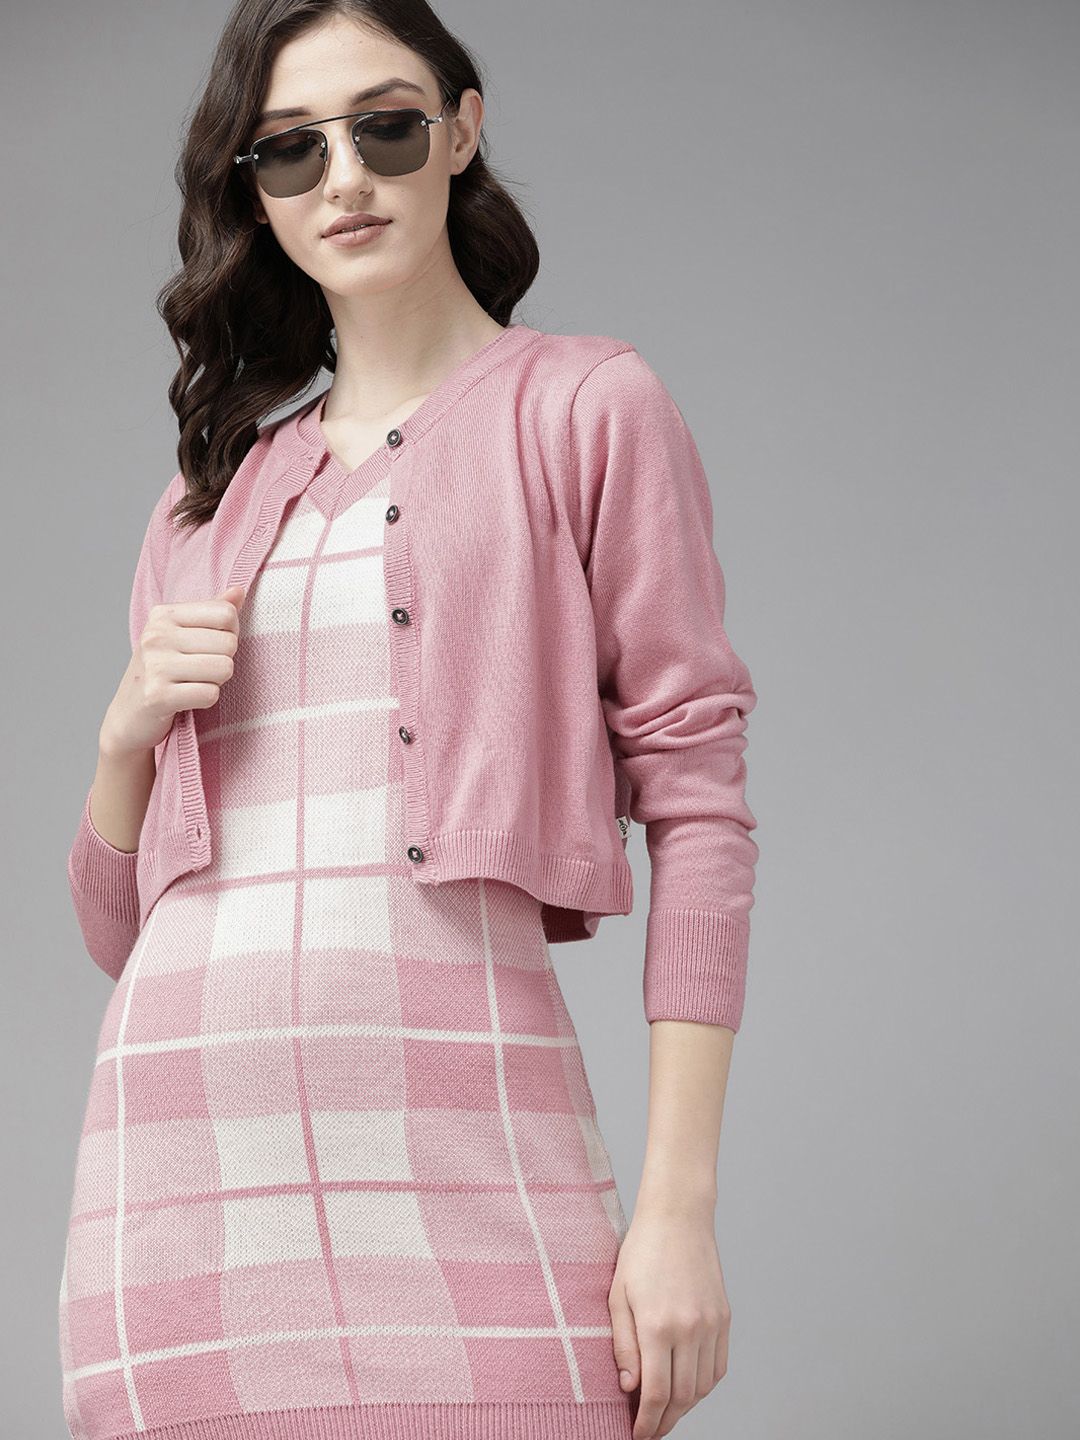 The Roadster Lifestyle Co. Pink & White Checked Acrylic Jumper Dress Price in India